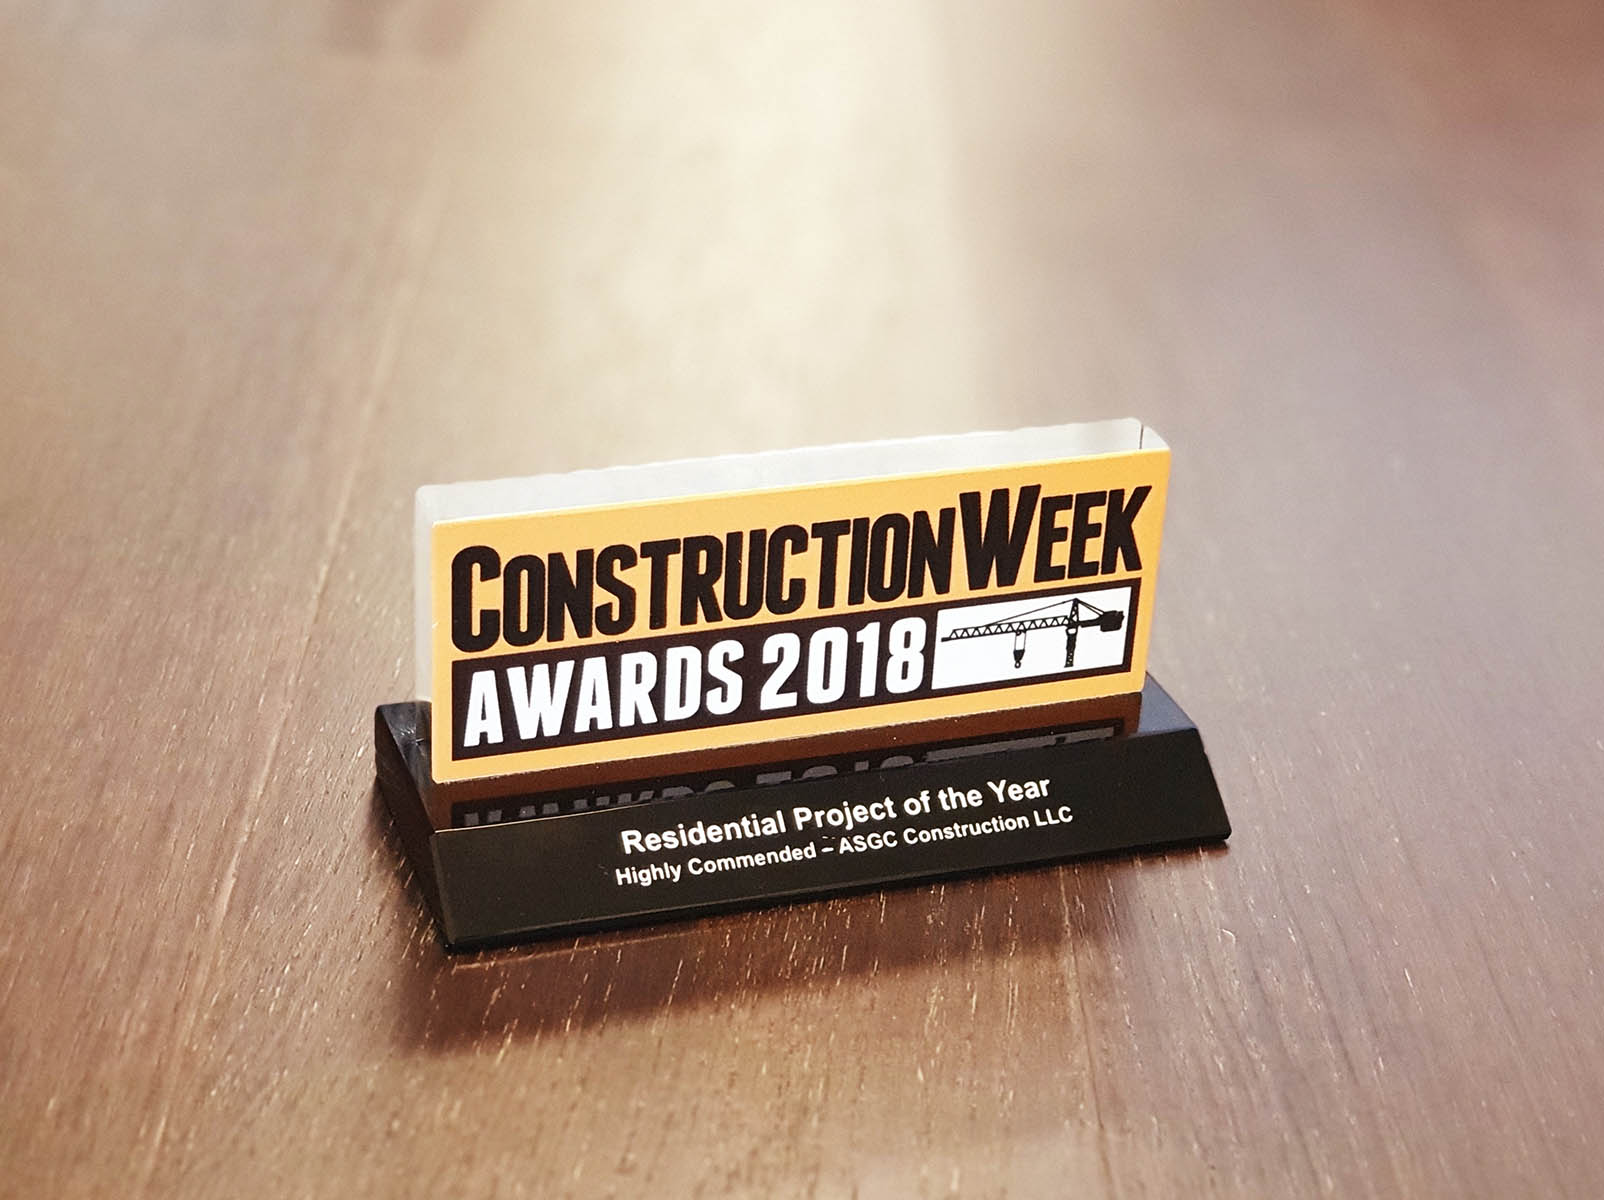 Bluewaters Residential Project of the Year Award 2018 by Construction Week